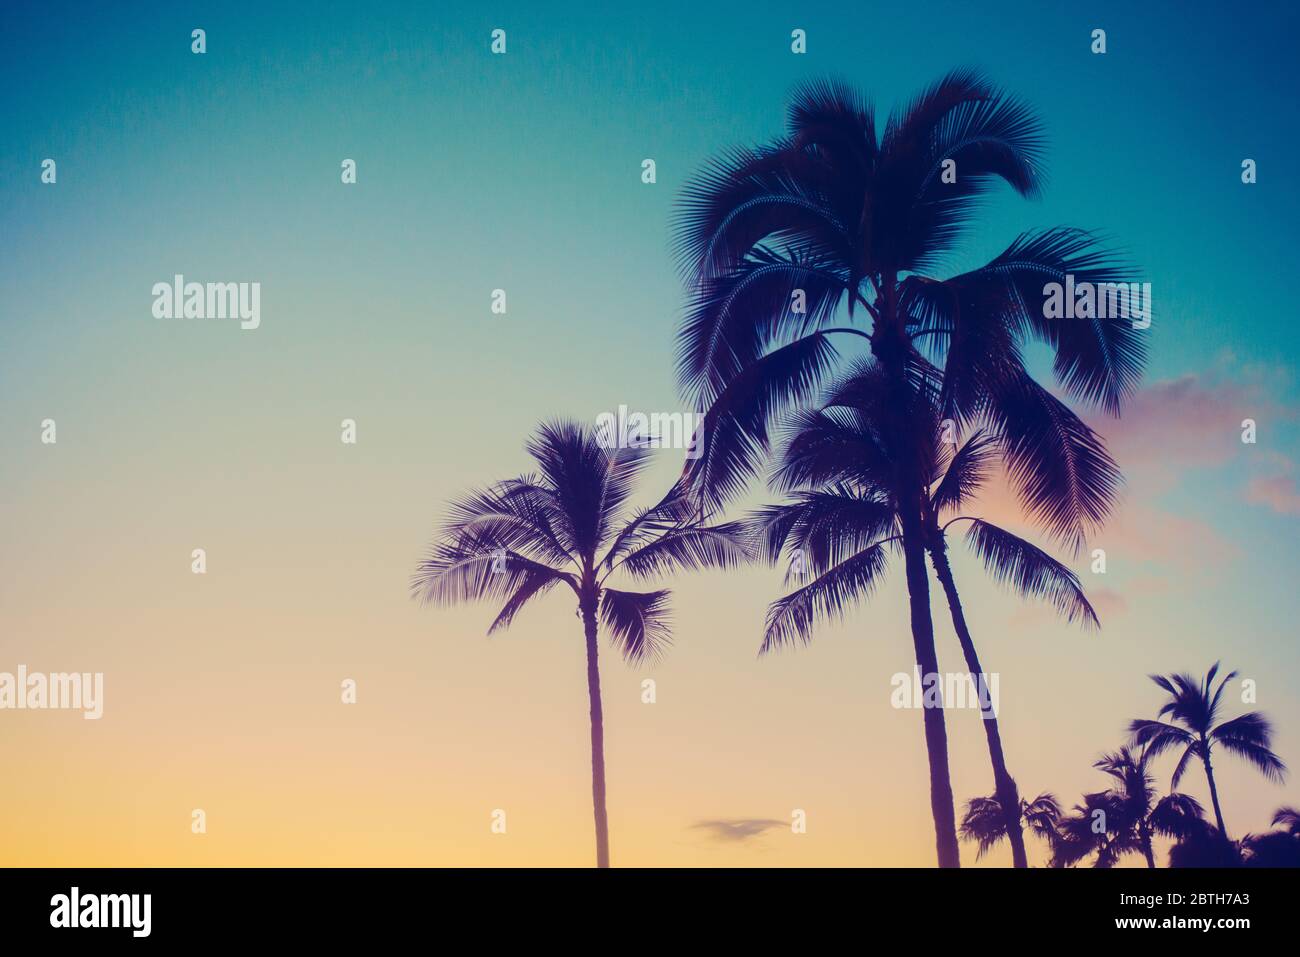 Tropical Vacation Background With Palm Trees at Sunset Stock Photo